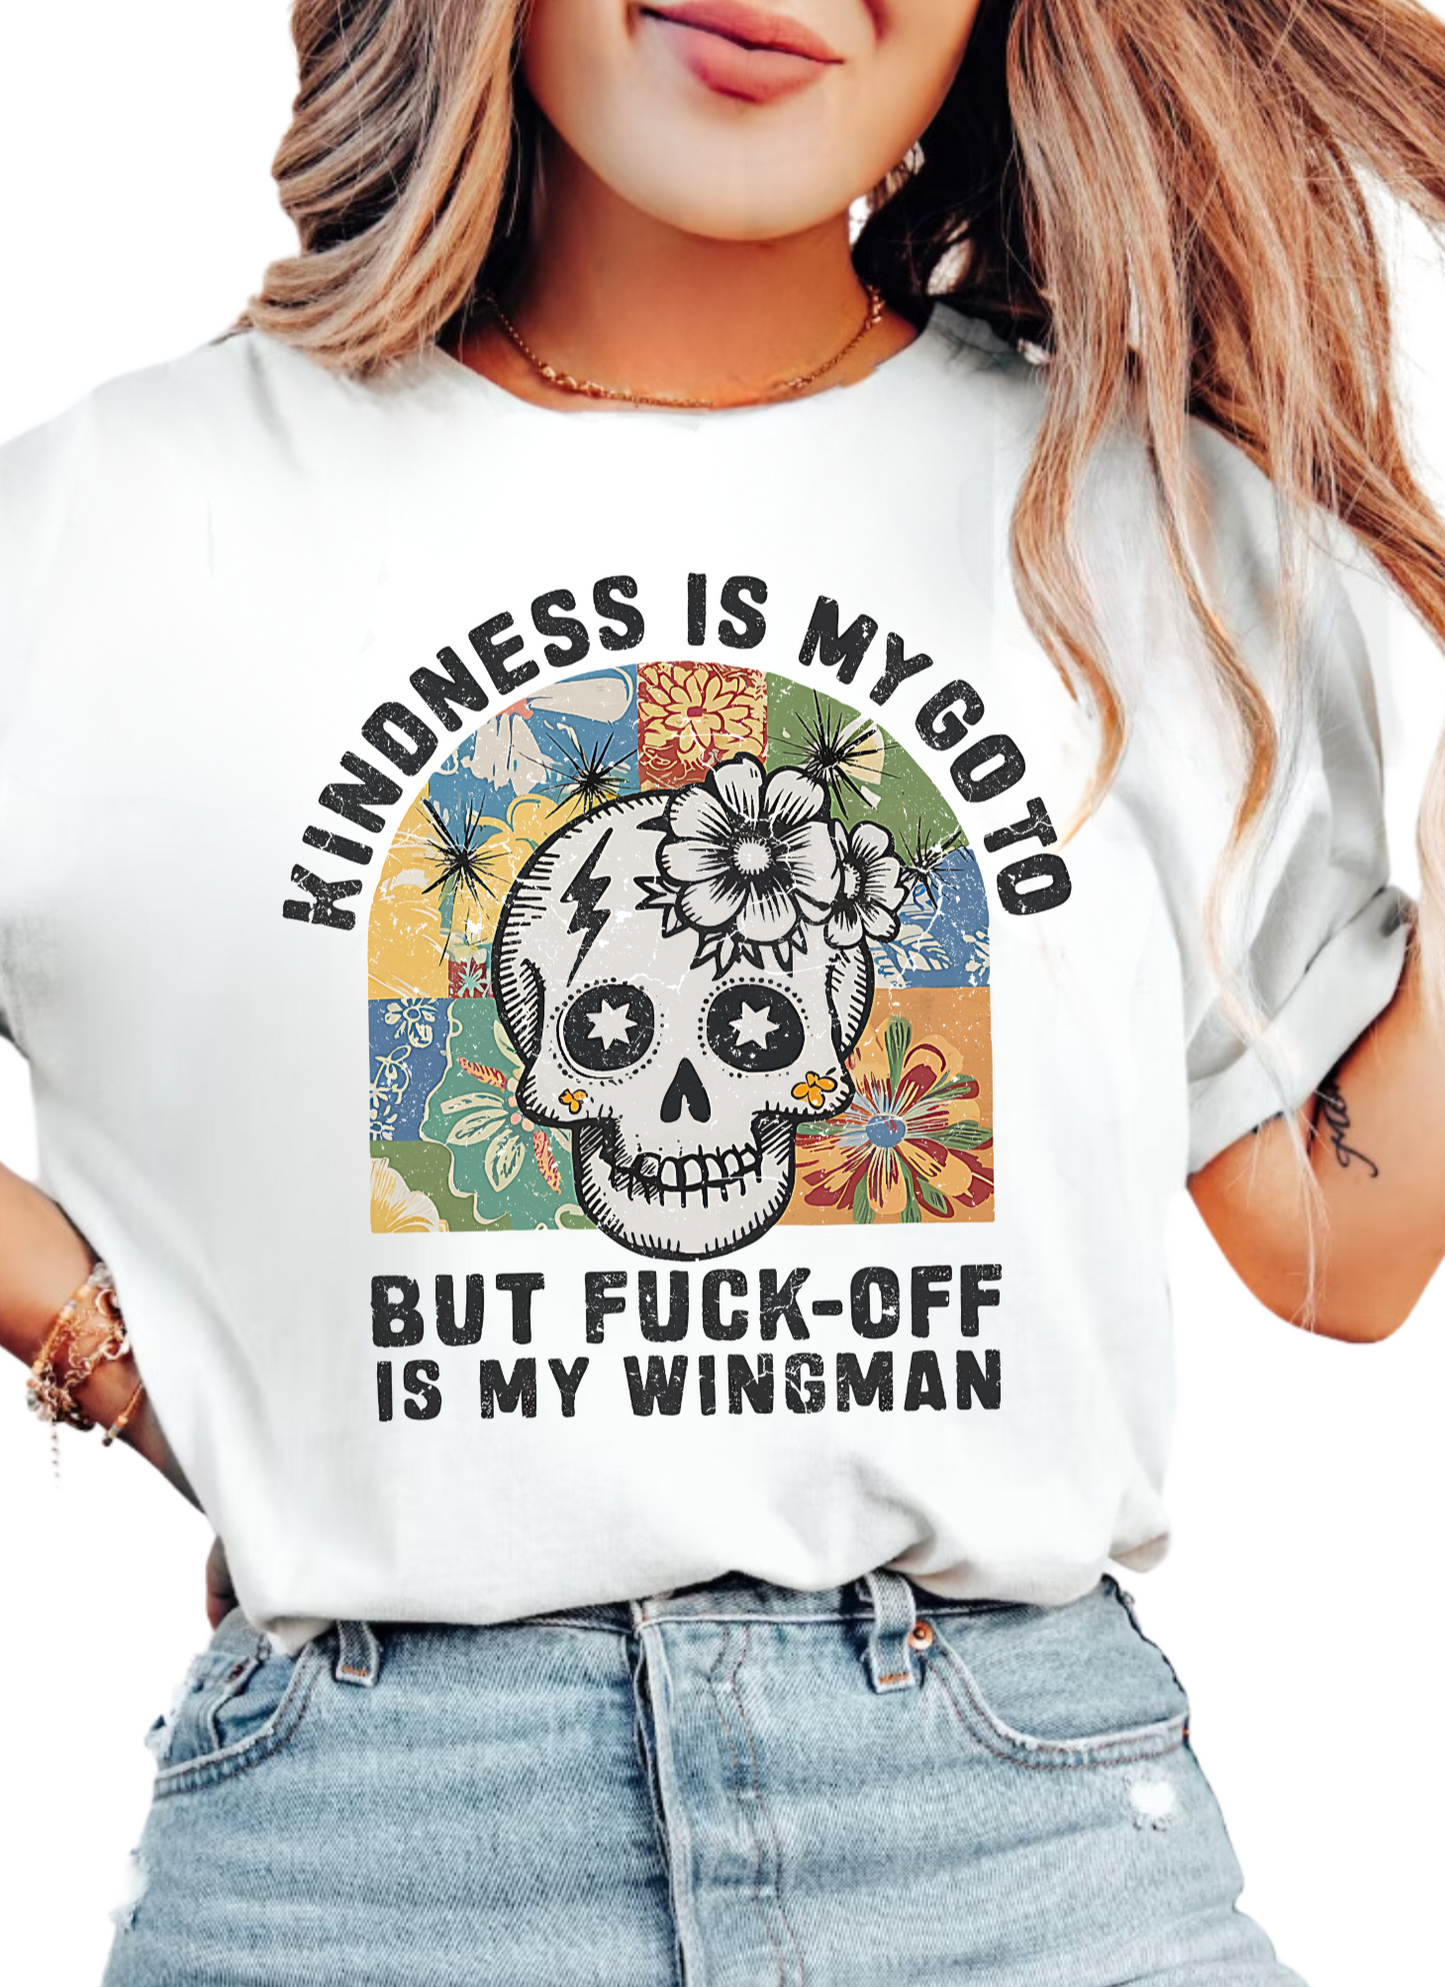 Kindness and Boldness T-Shirt